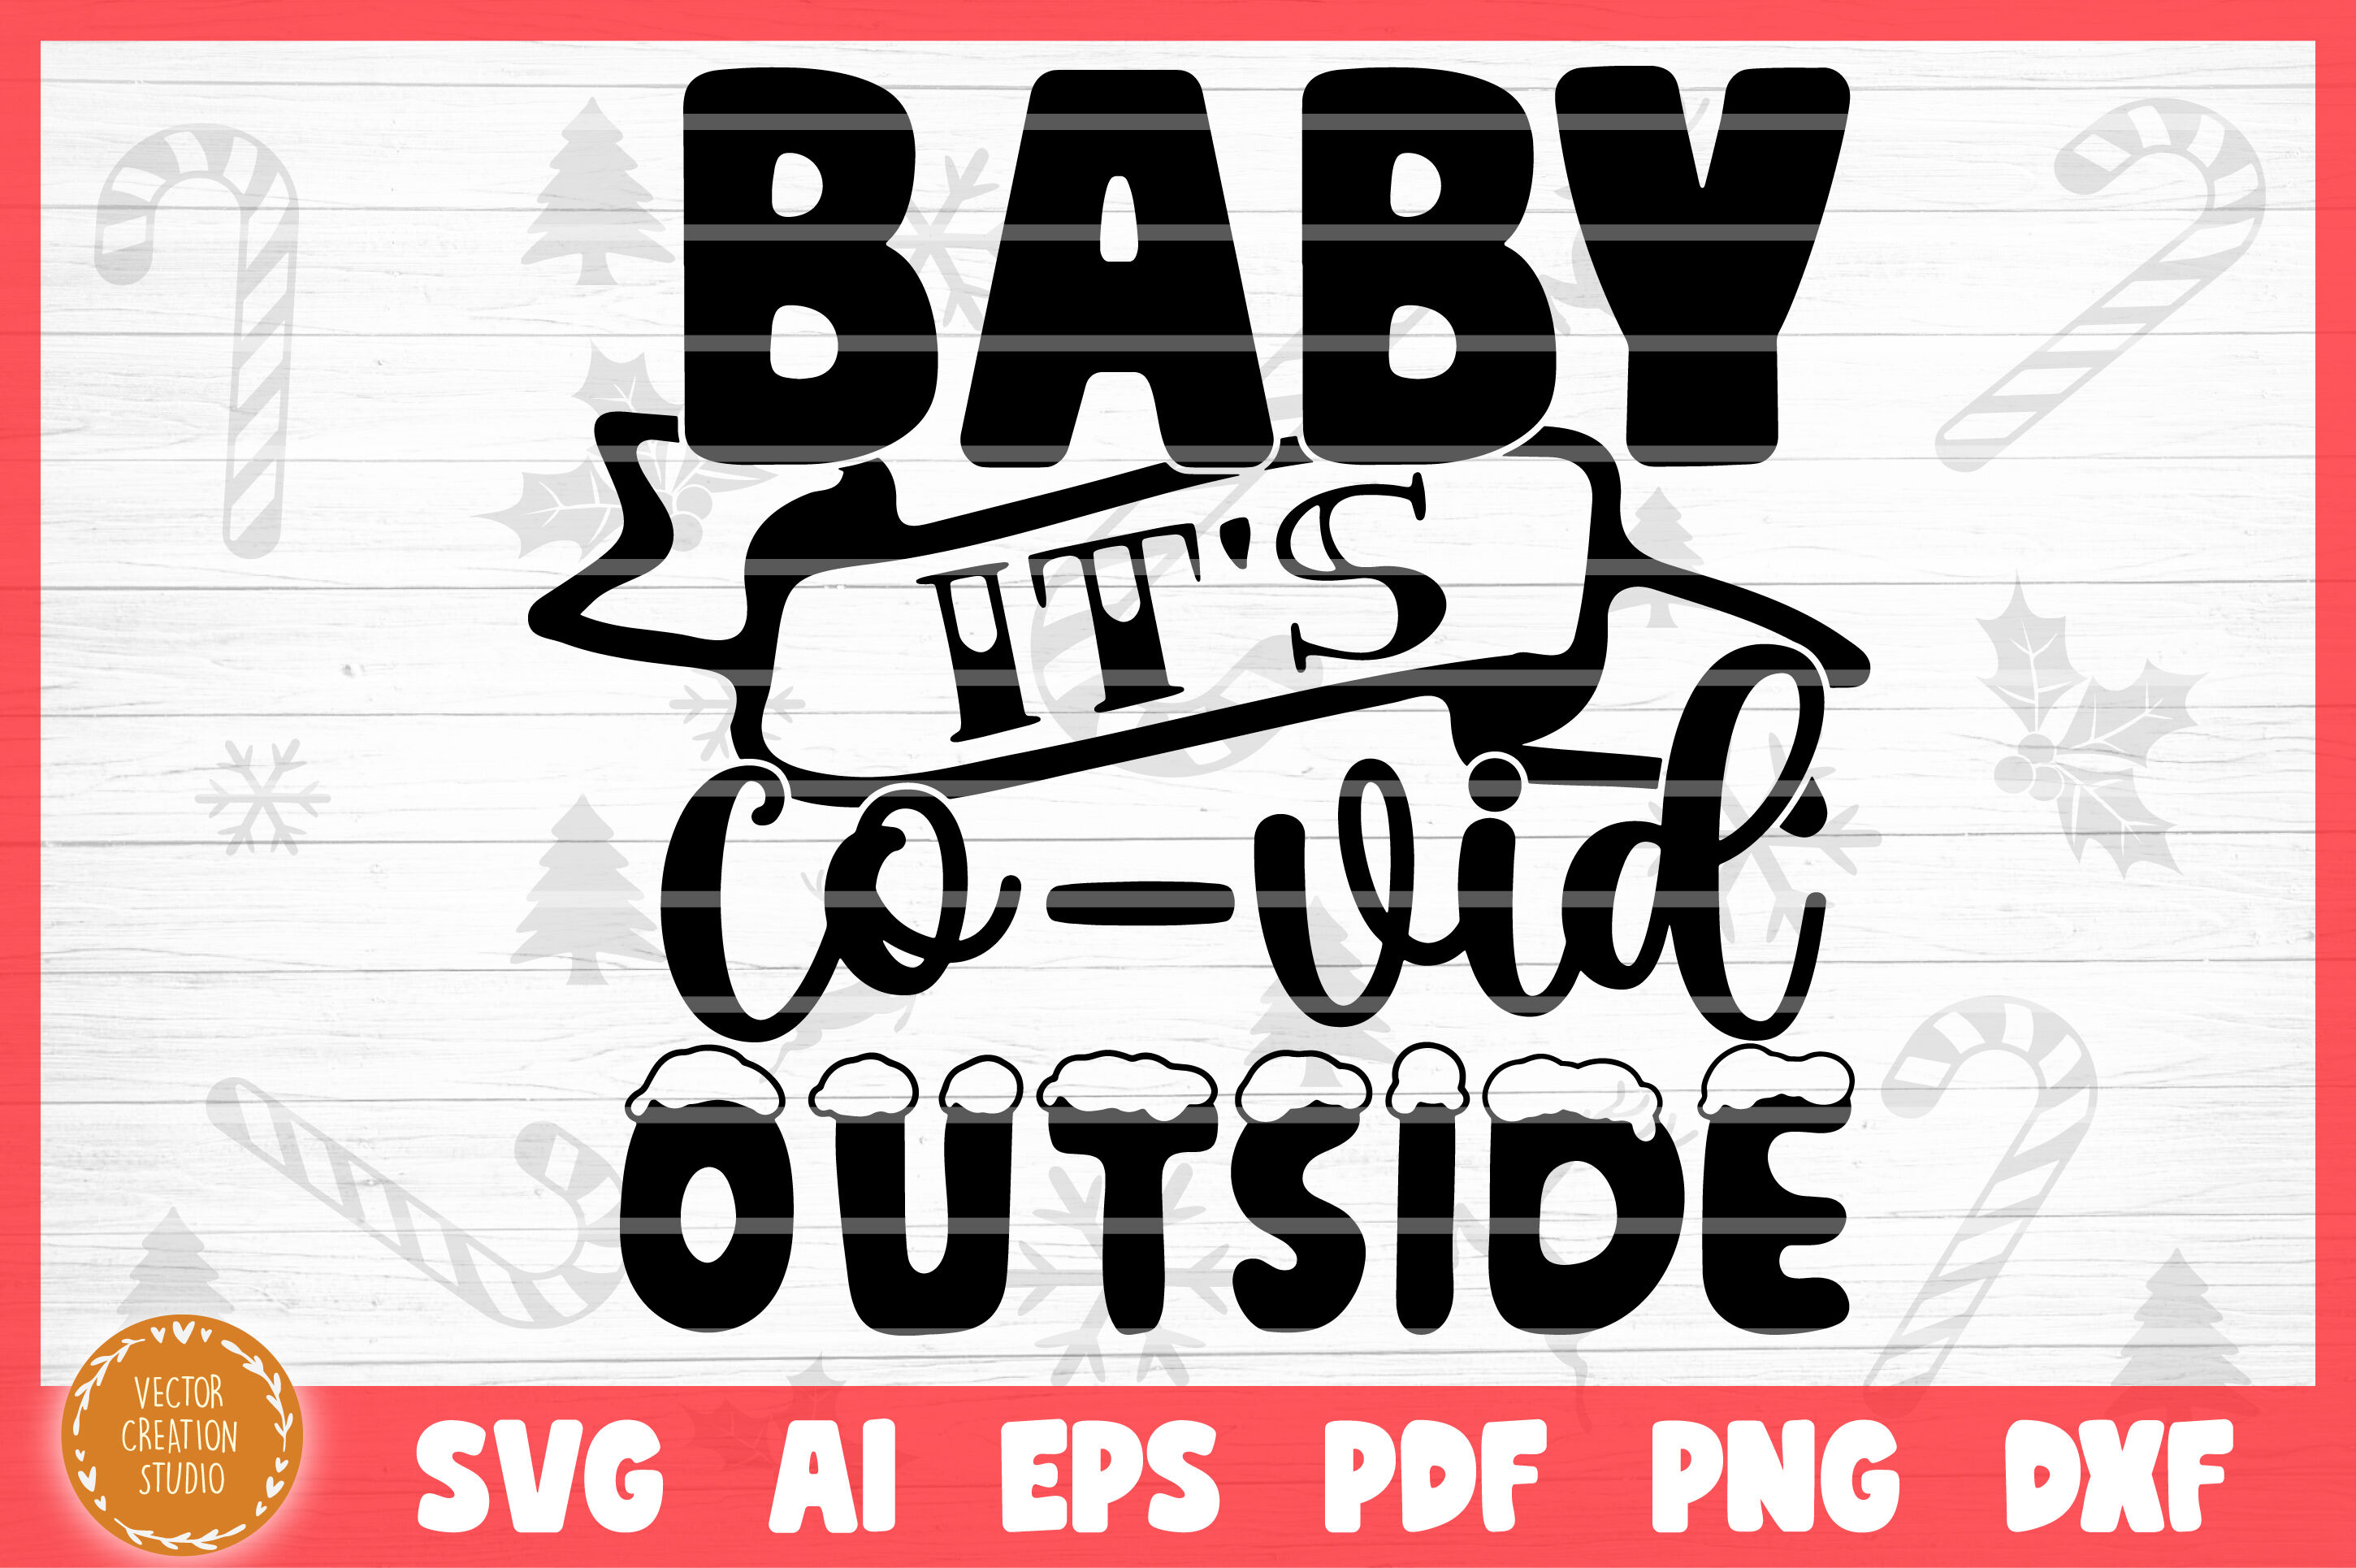 Baby It S Covid Outside Christmas 2020 Svg Cut File By Vectorcreationstudio Thehungryjpeg Com